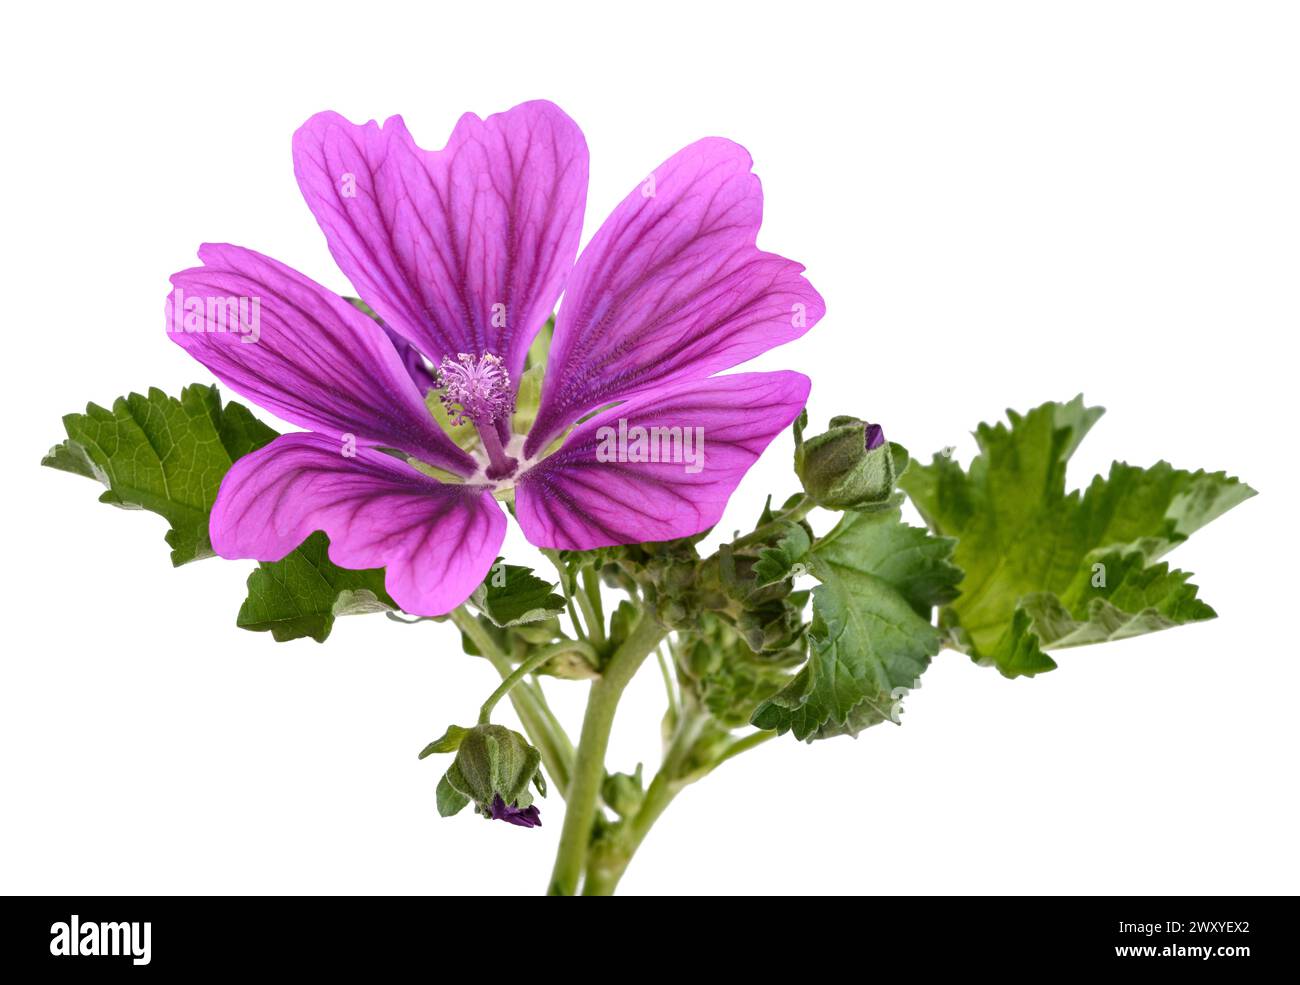 Mallow plant with  flower isolated on white background Stock Photo